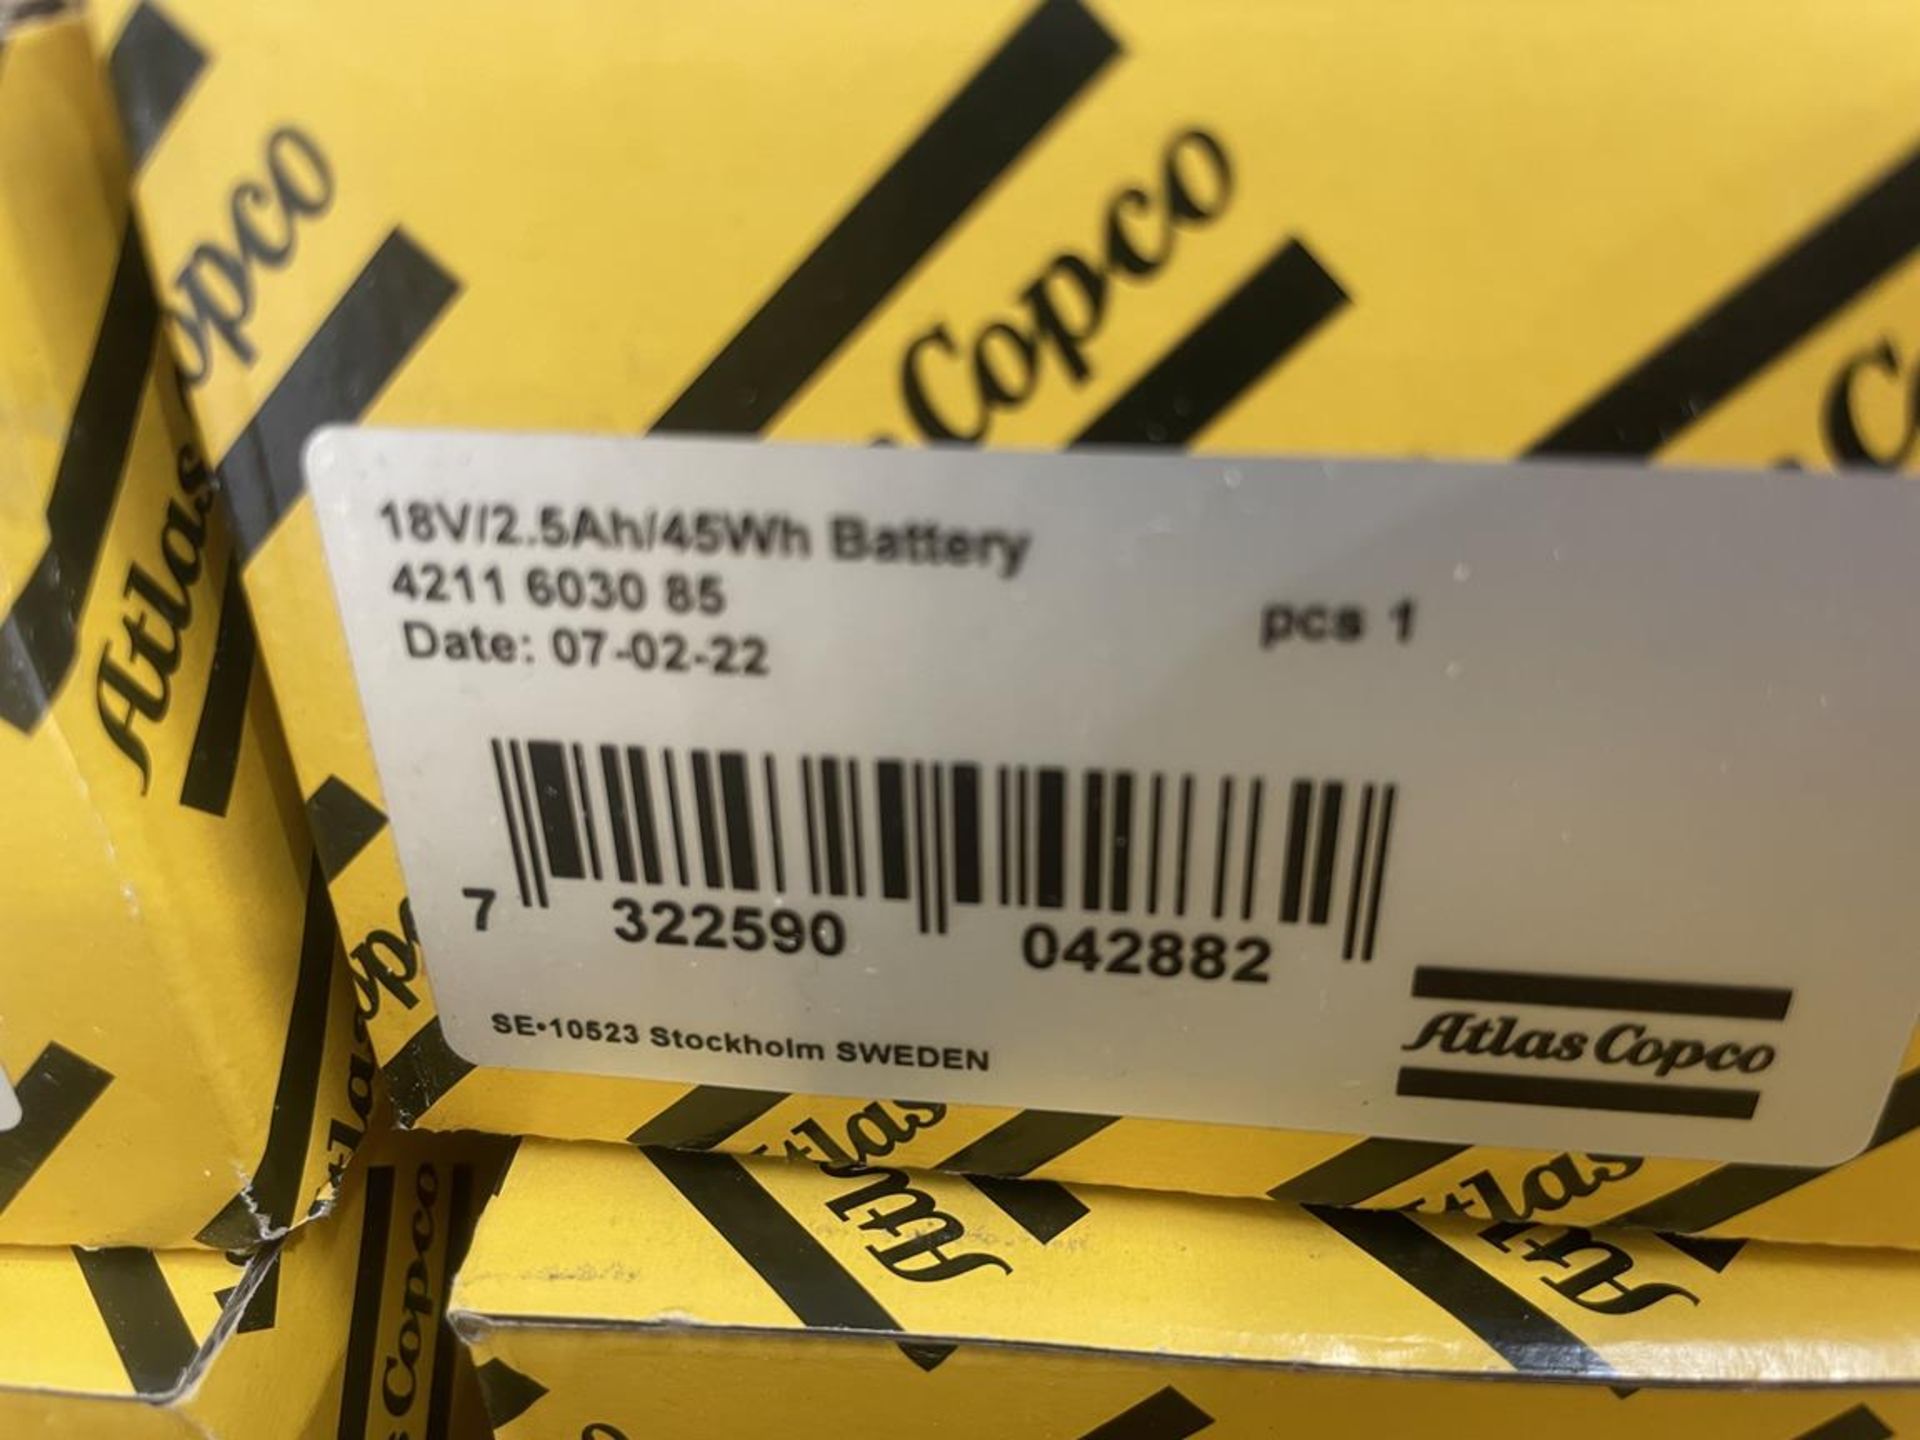 8x (no.) Atlas Copco, 4211 6030 85, 18v/2.5 amp batteries (boxed and unused) - Image 2 of 2